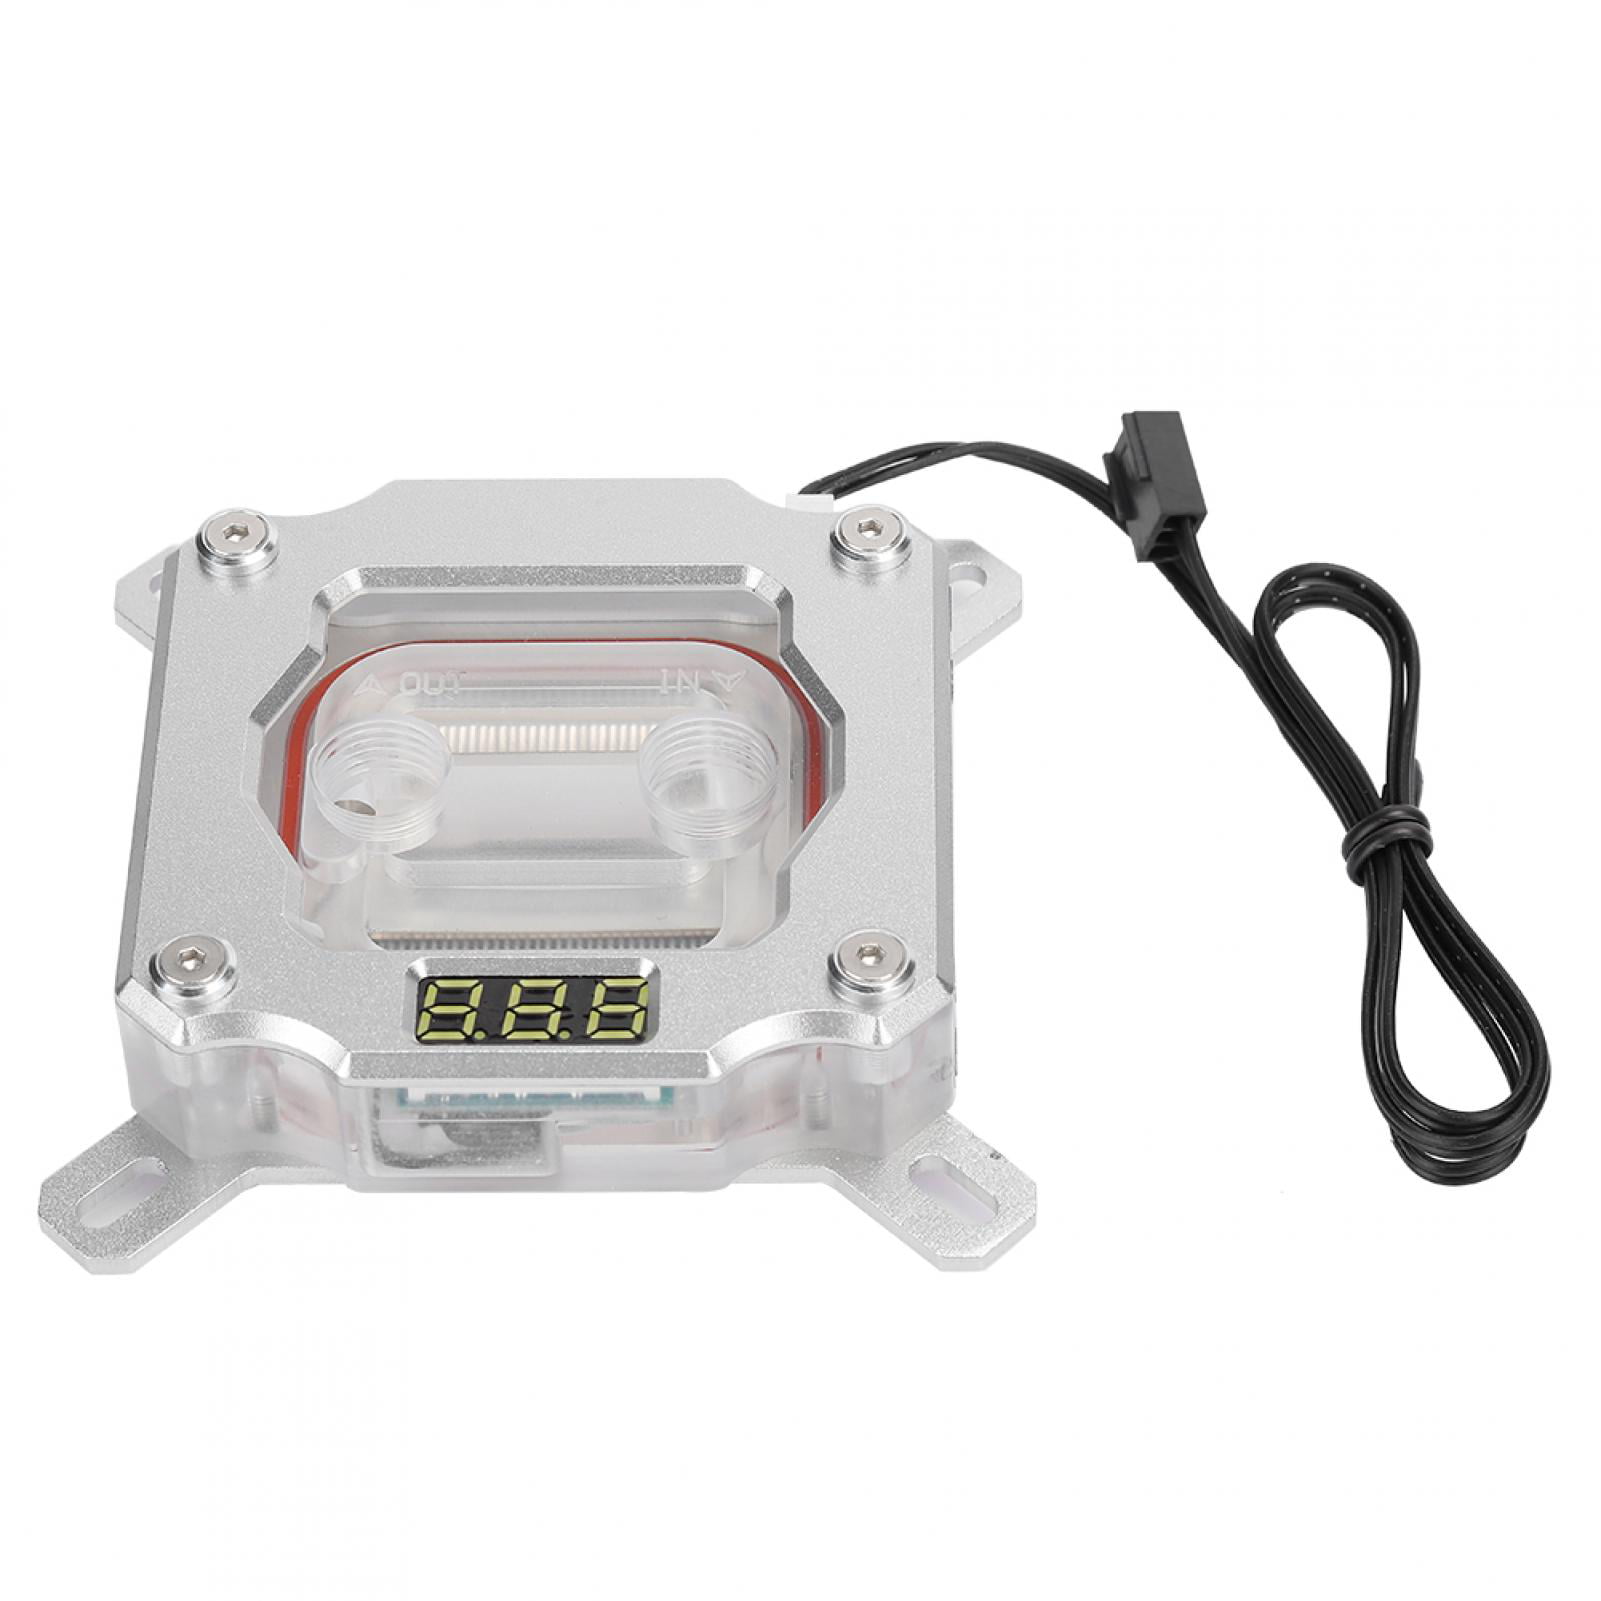 eskalere cricket mareridt YLSHRF CPU Waterblock,CPU Cooling System,UPR-2018 Computer CPU Waterblock Water  Cooling Block With Temperature Display For AURA Synchronization -  Walmart.com